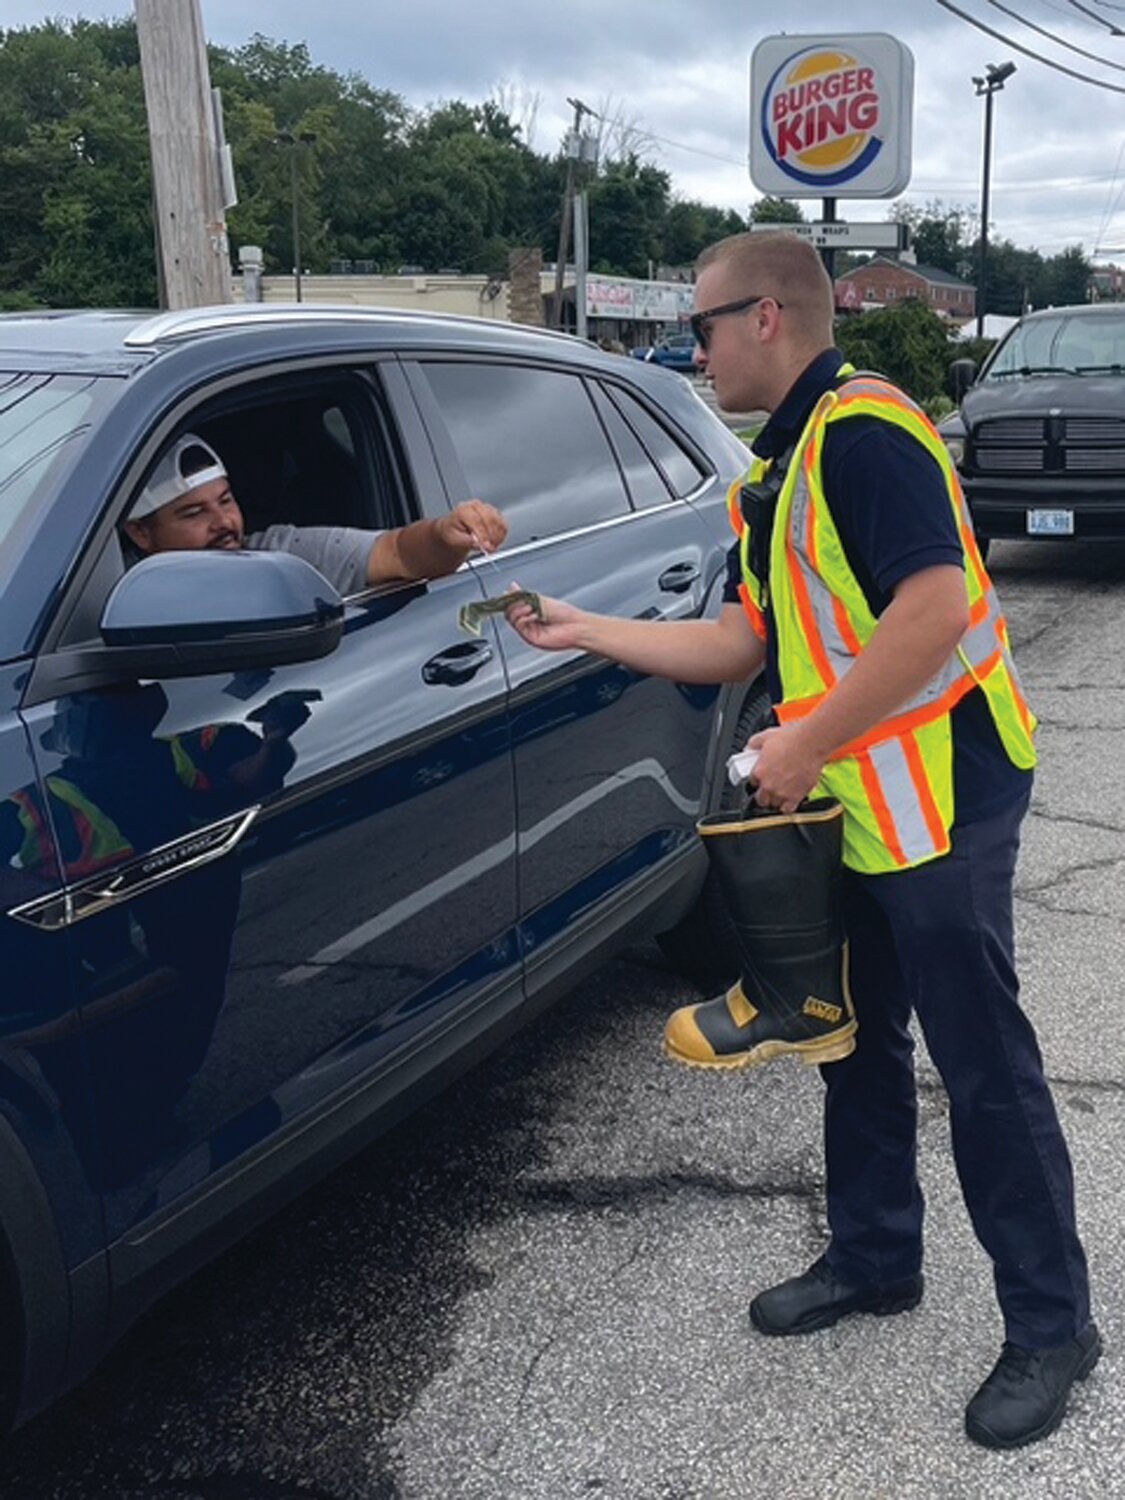 THANK YOU …. THANK YOU: That’s what Johnston Firefighters like Tyler McNulty said to motorists on successive weekends when Local 1950 collected $14,000 for MDA through the nationally famous Fill the Boot program.